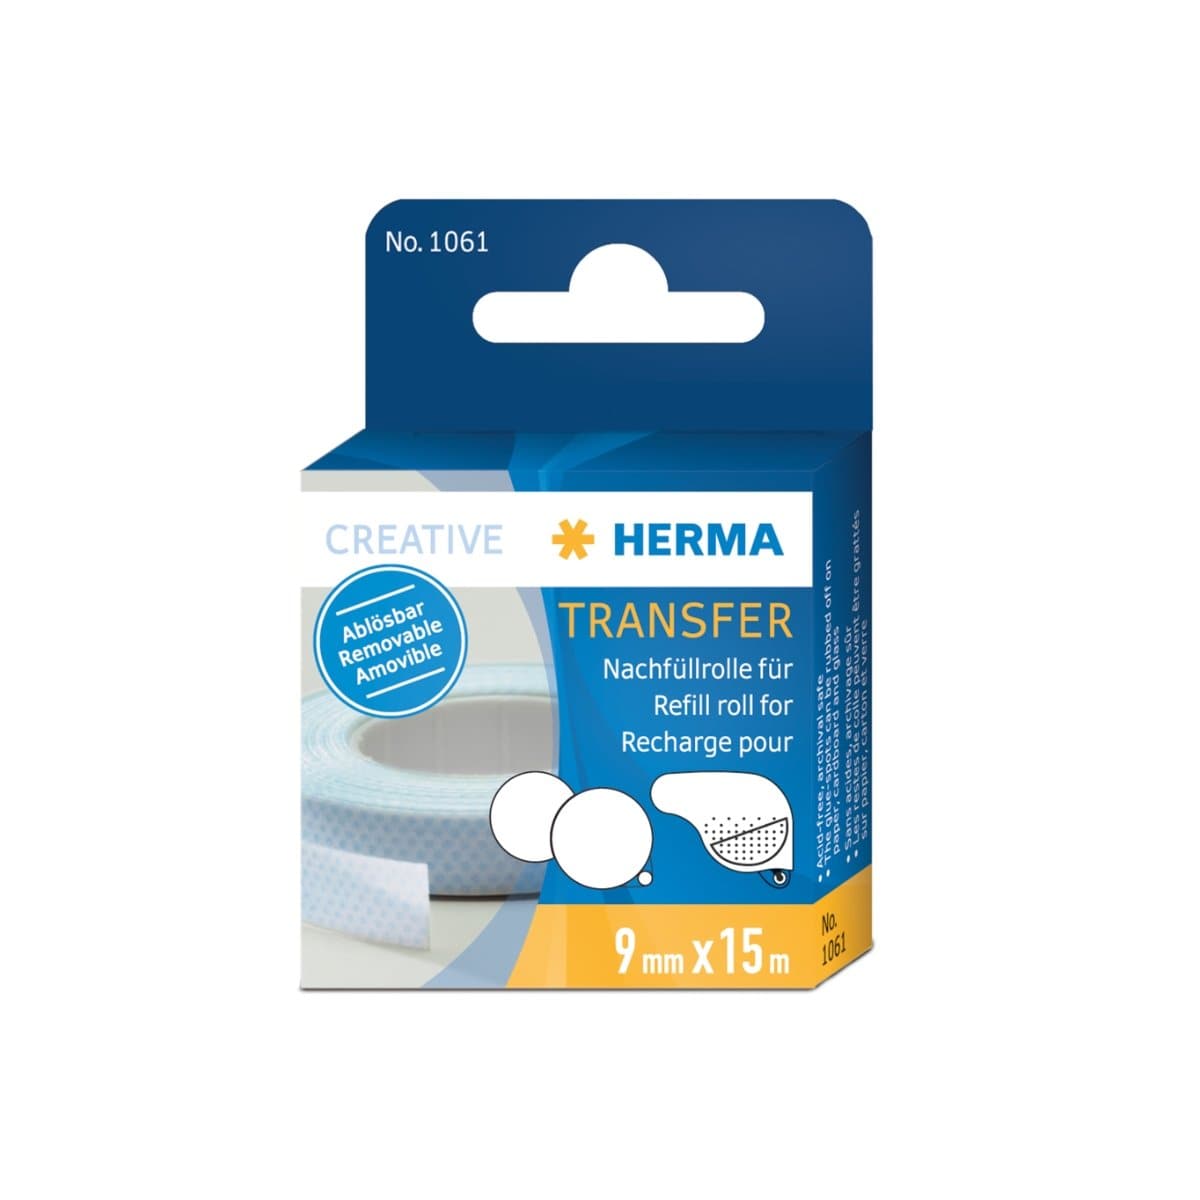 Herma Transfer Glue Refill, removable, 9 mm x 15 m